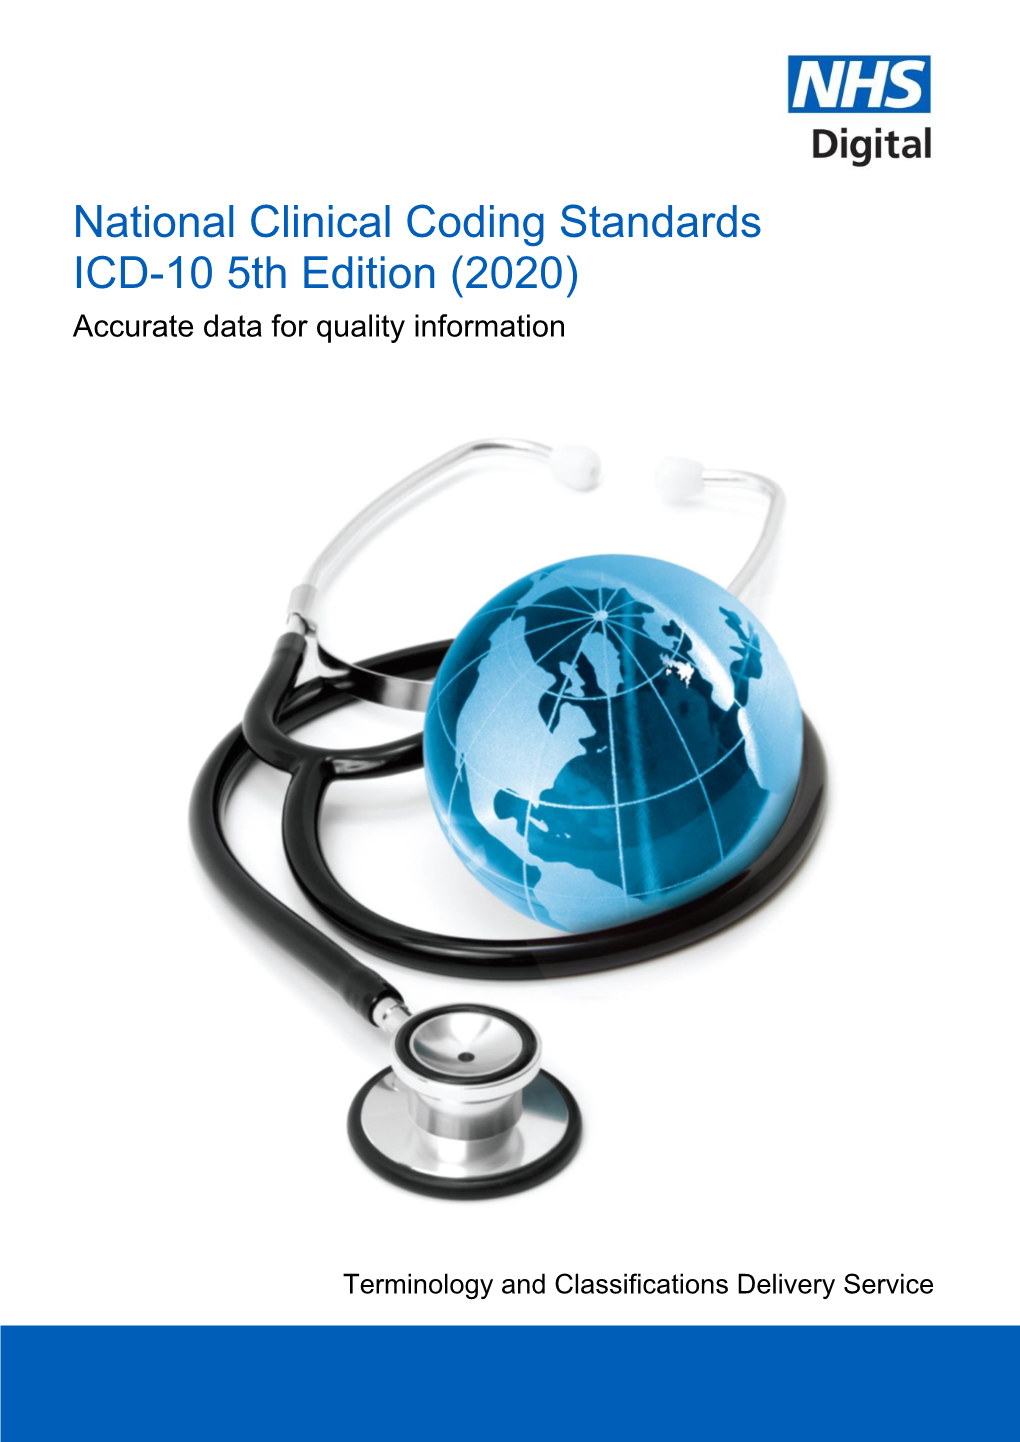 National Clinical Coding Standards ICD-10 5Th Edition (2020) Accurate Data for Quality Information